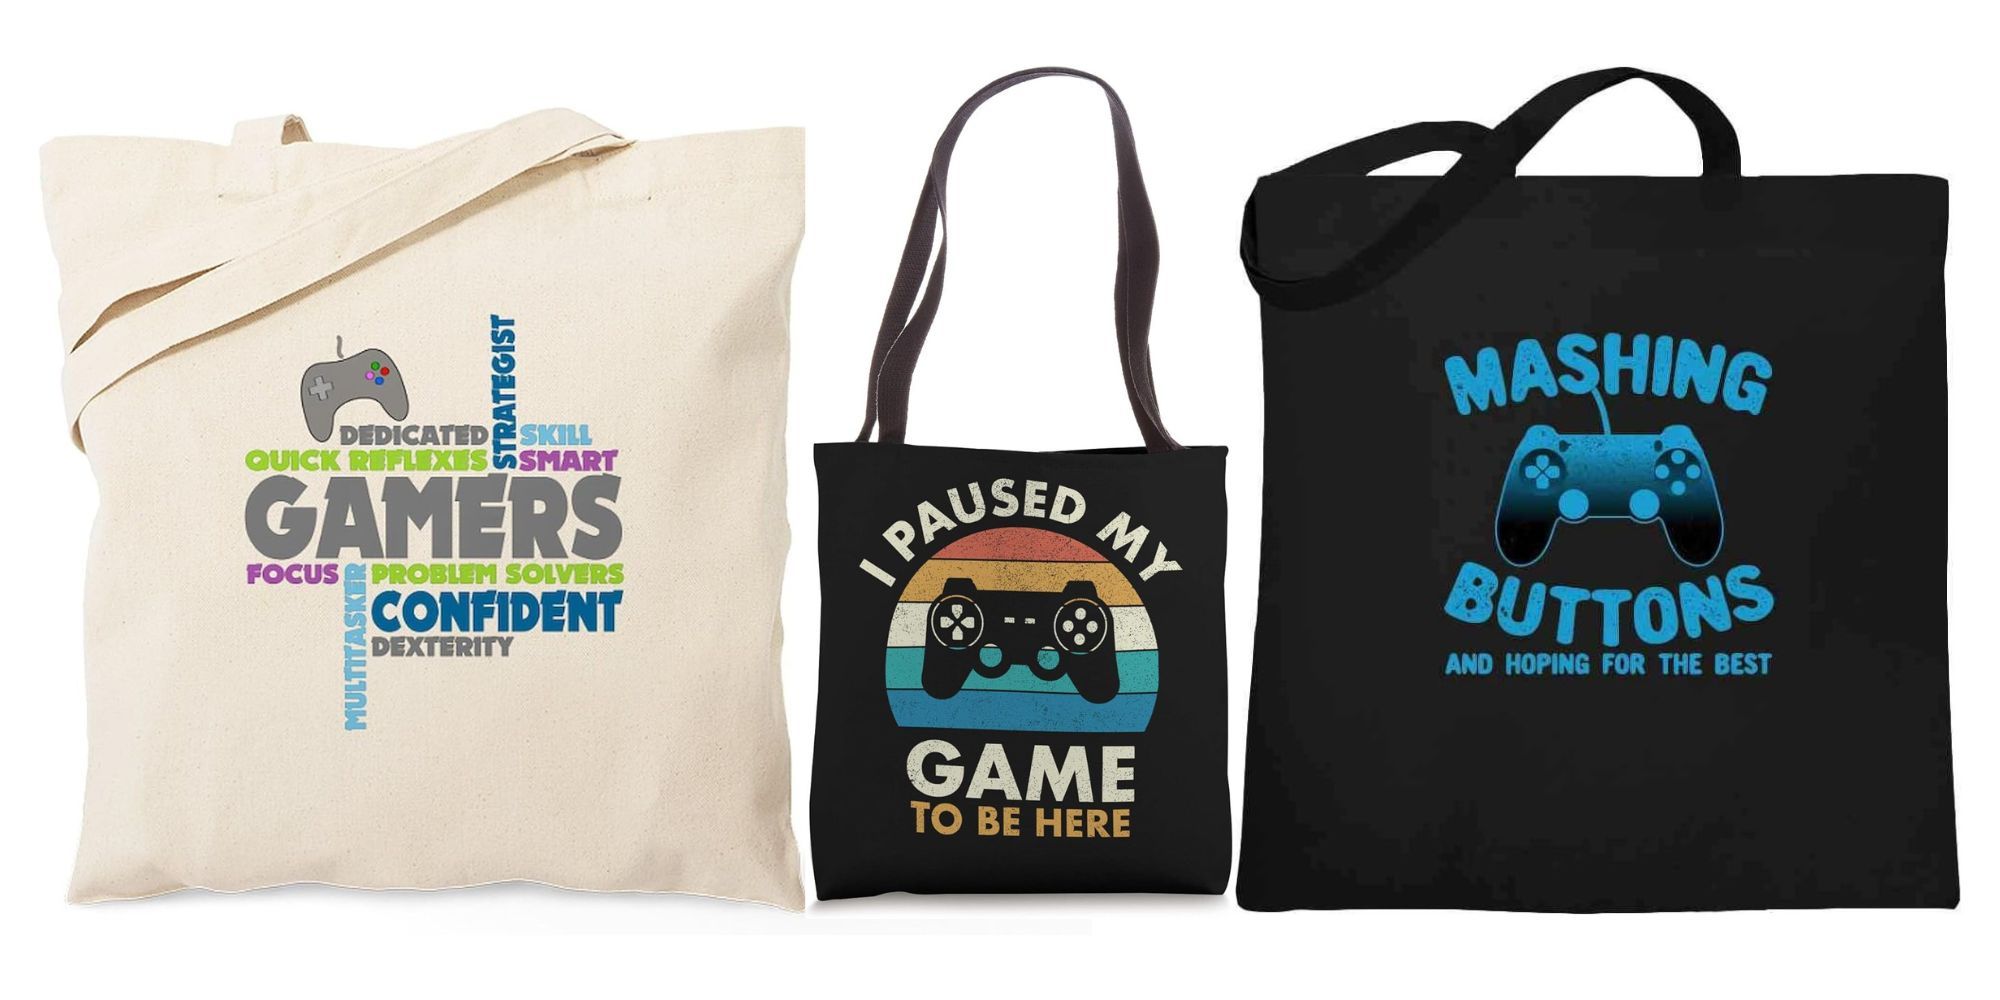 Gamers Adjectives, I Paused My Game To Be Here, Mashing Buttons And Hoping For The Best Tote Bag